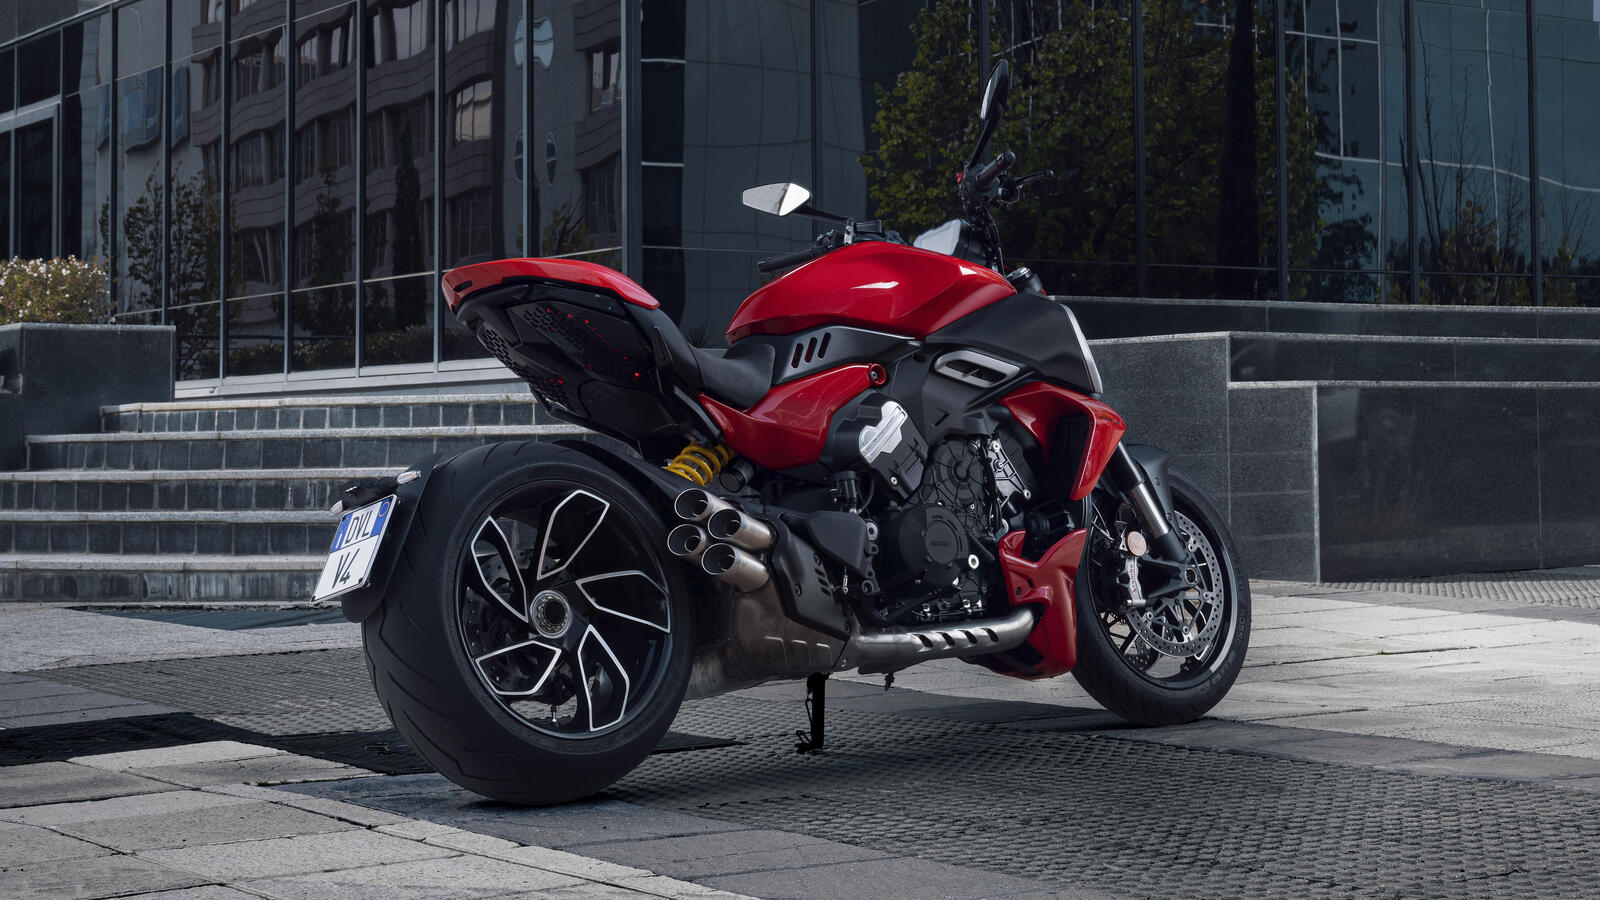 Free photo The Ducati diavel v4 is on the street.